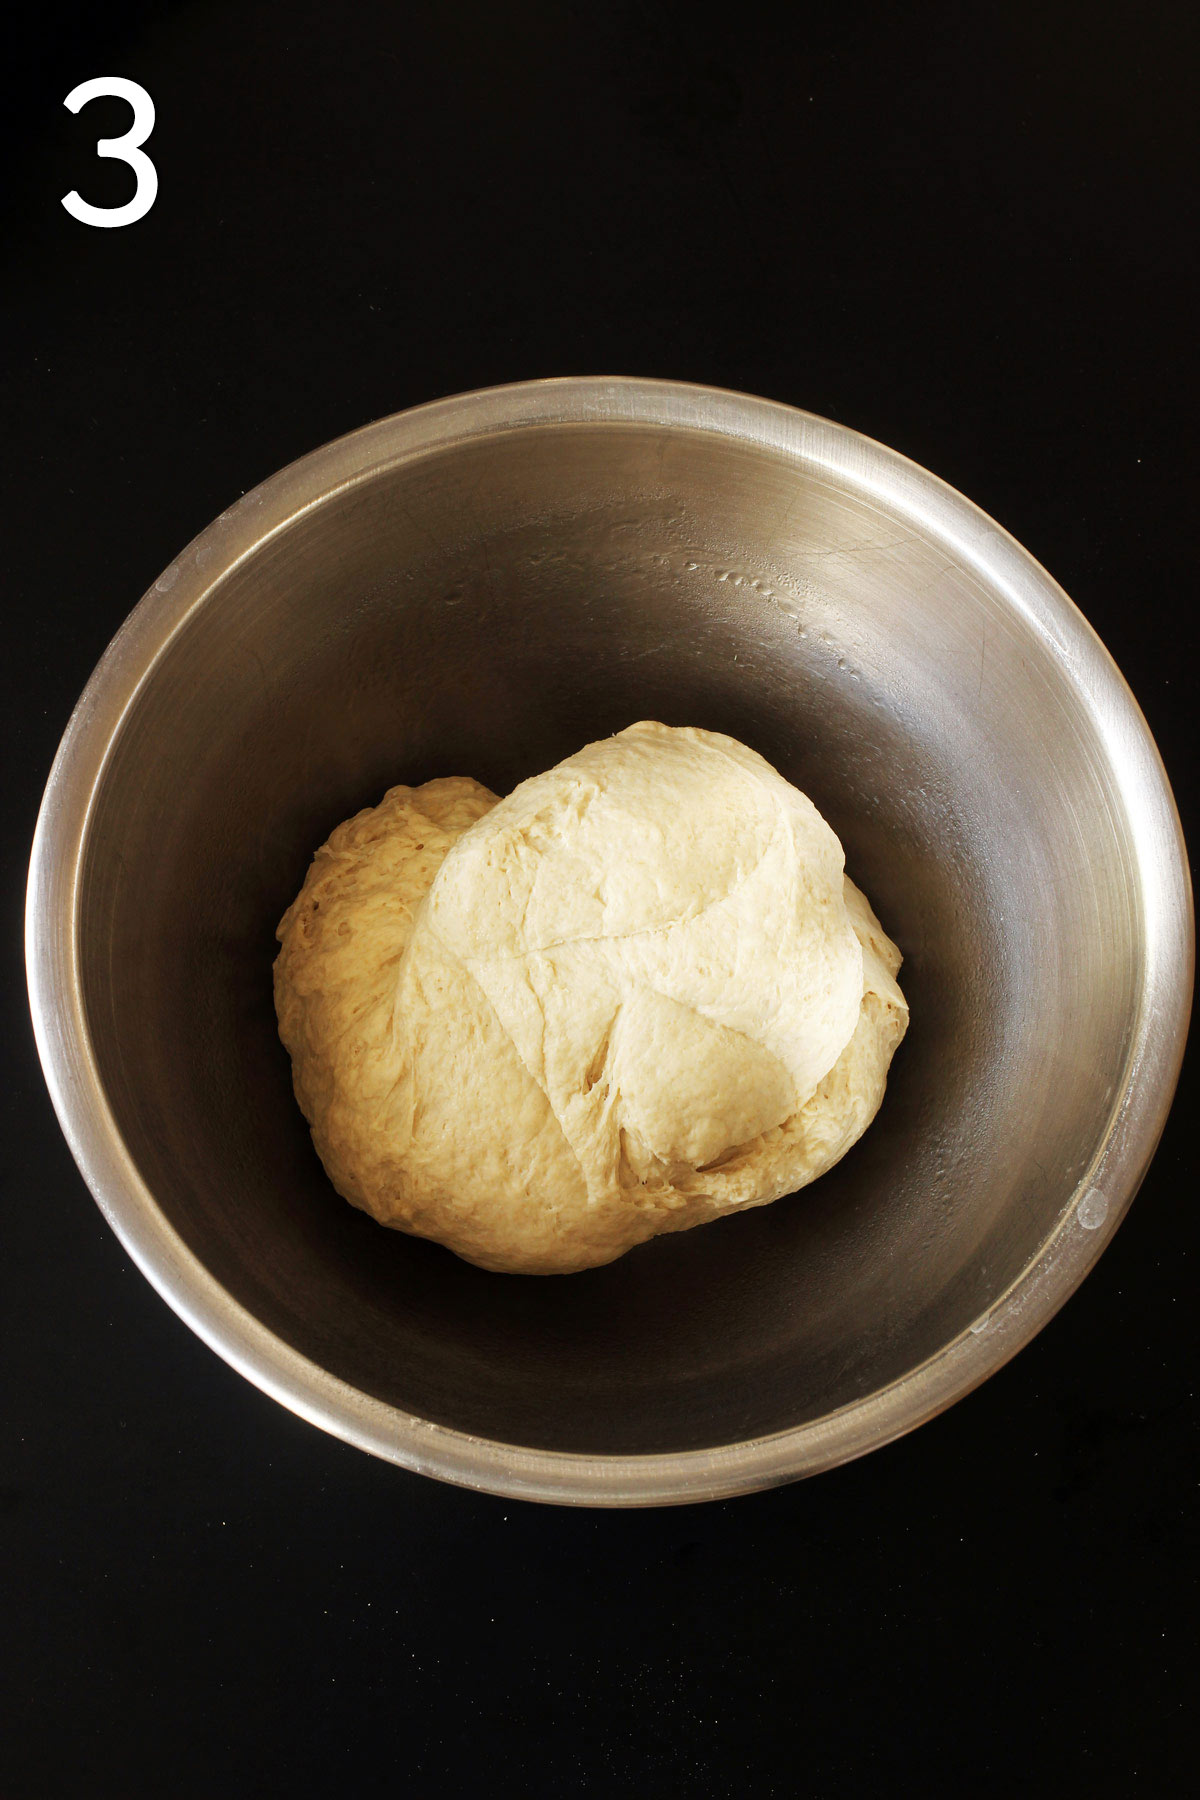 kneaded dough in greased bowl ready to rise.